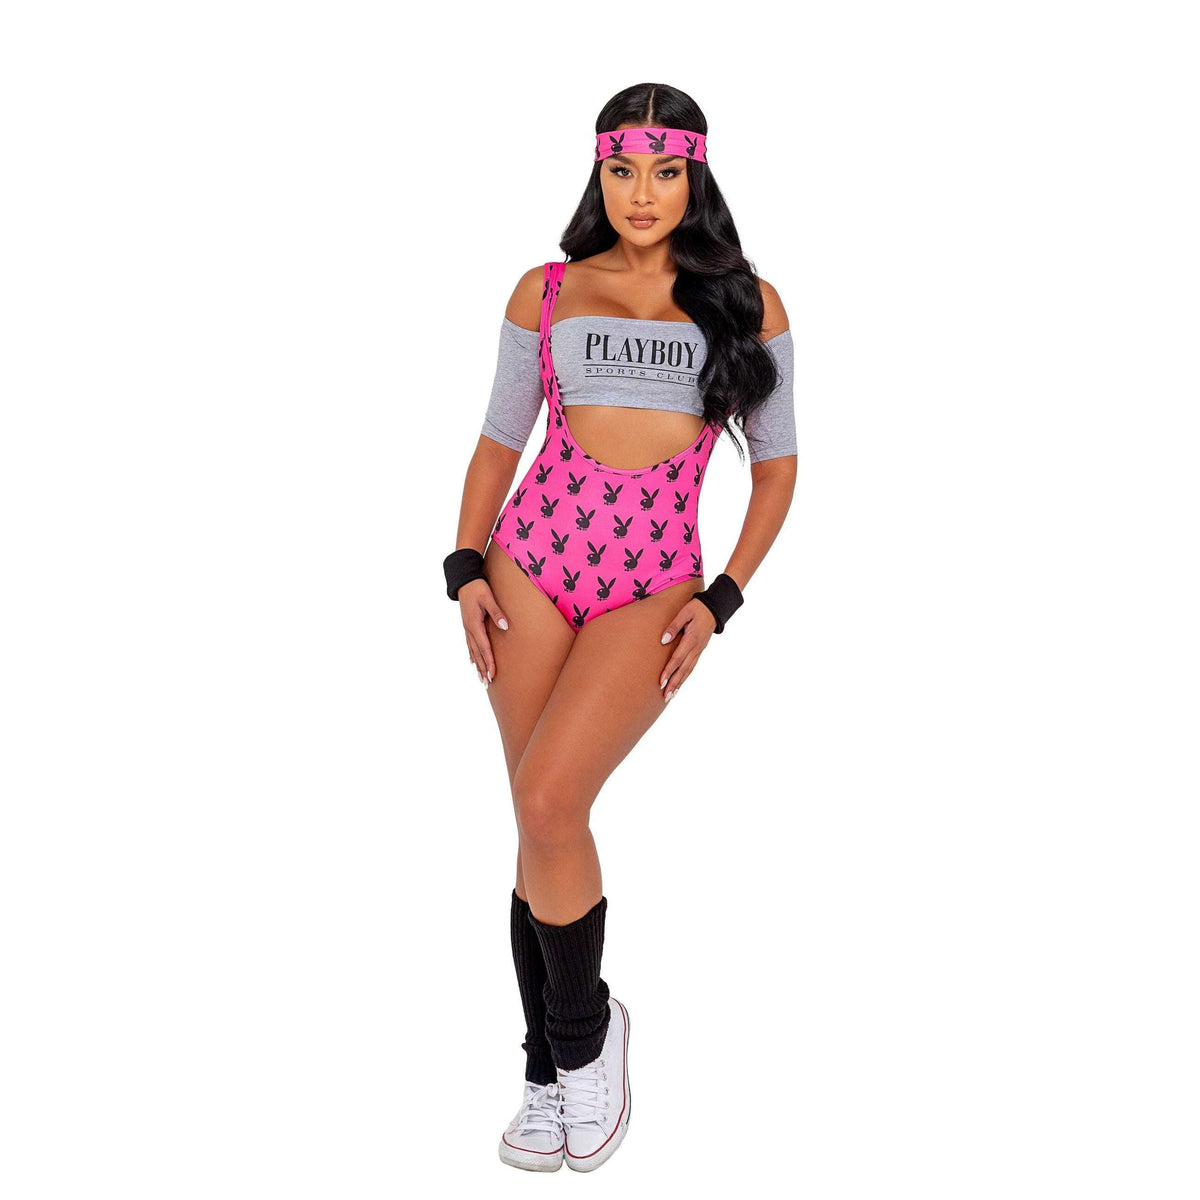 Playboy Retro Lets Get Physical Adult Costume